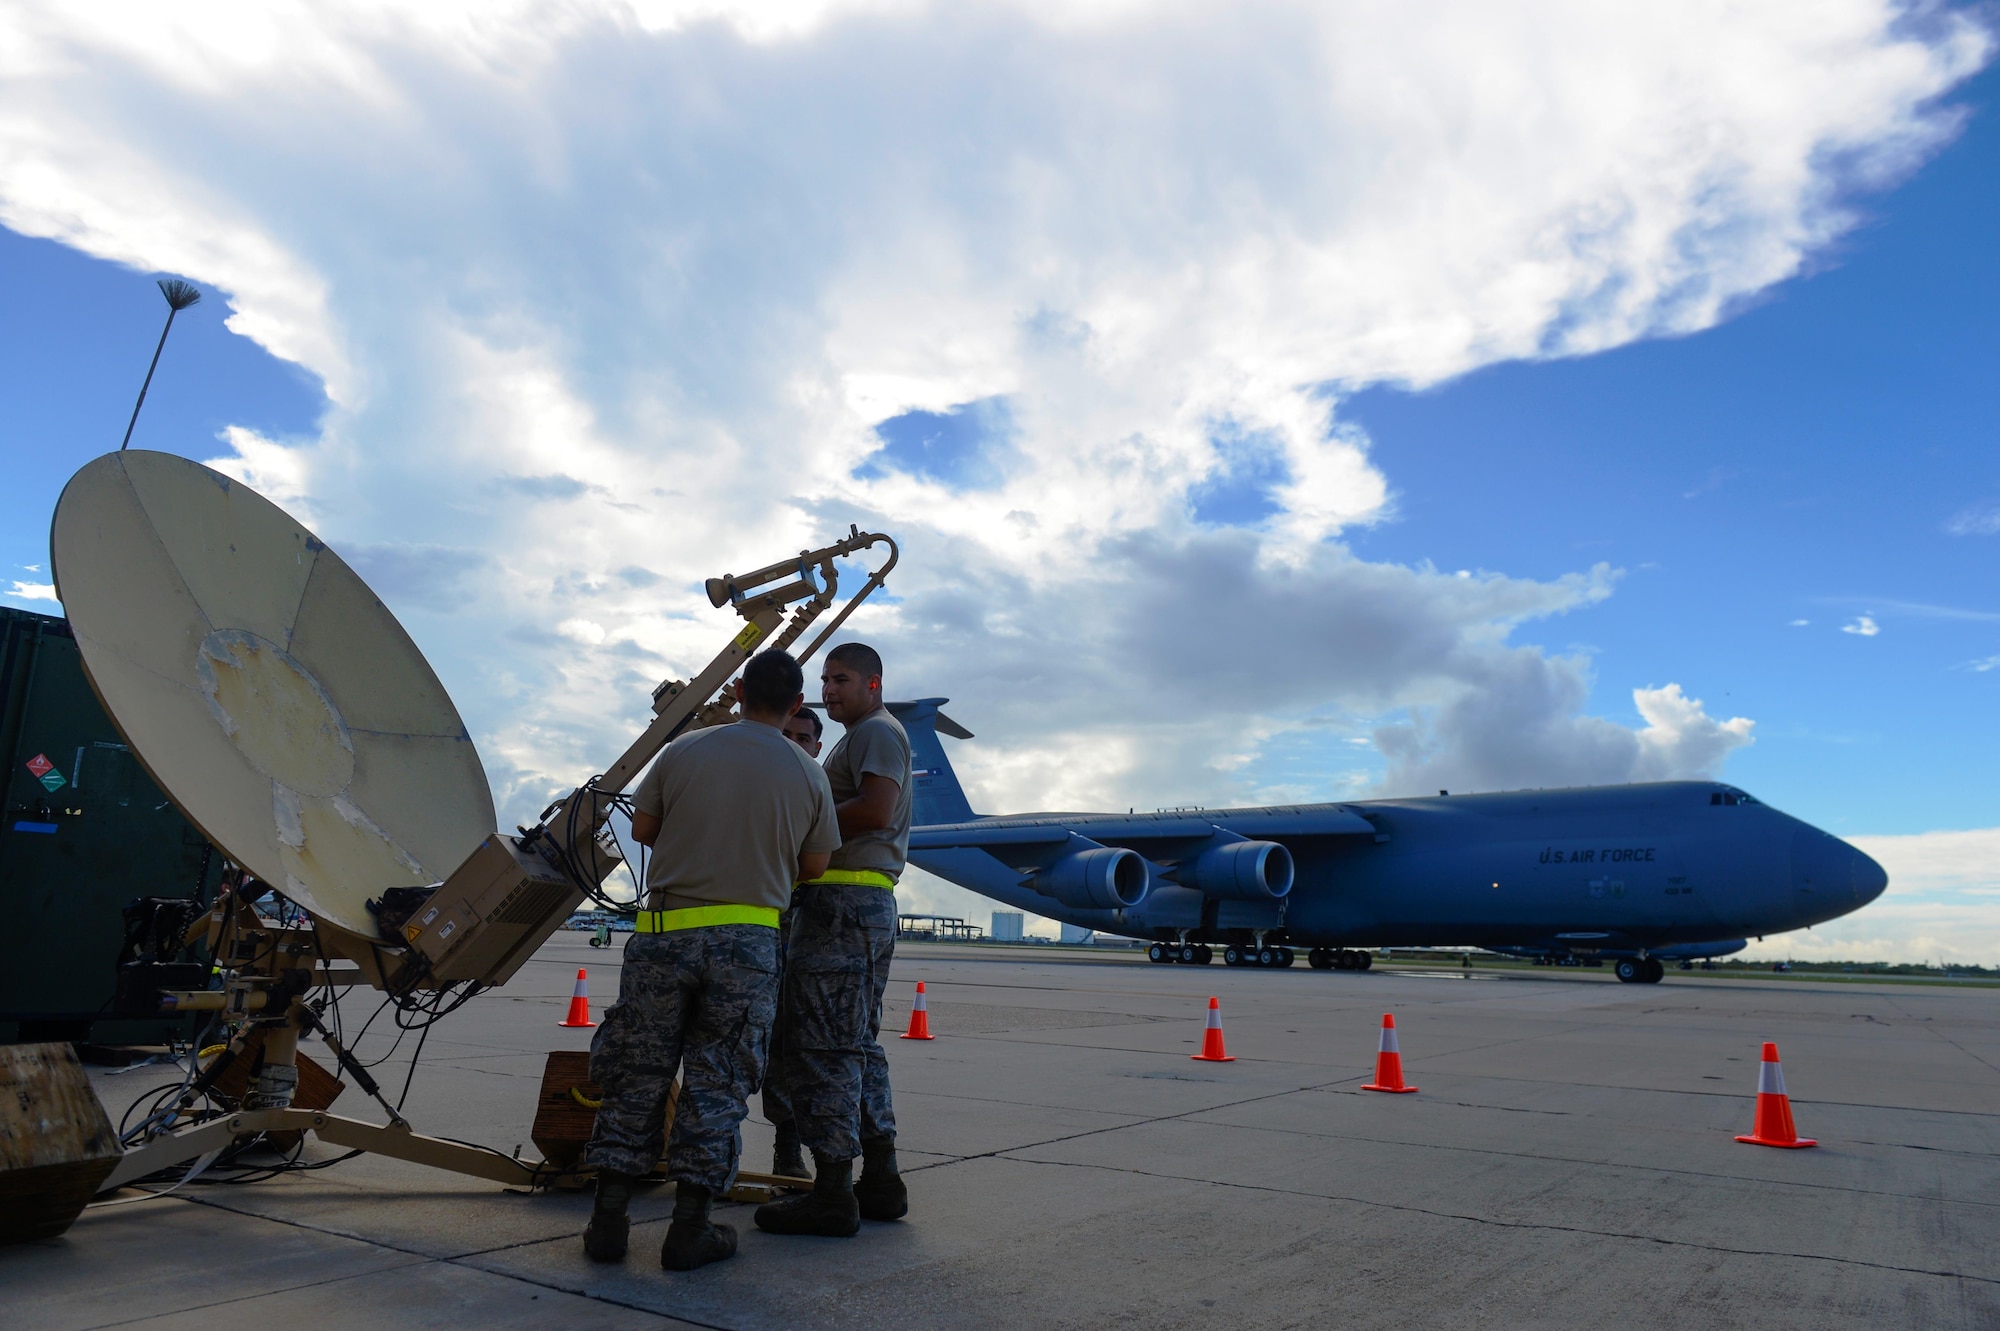 Airmen from the 433rd Airlift Control Flight, Joint Base San Antonio-Lackland, Texas, assemble a small package of initial communications equipment during Exercise Alamo Express at Corpus Christi Naval Air Station, Texas, Sept. 16, 2016. Alamo Express is the 433rd AW’s premier training exercise that prepares Airmen for real-world situations. During the exercise, aircrew conduct land and water survival training, cargo uploading and downloading, communications, aerial port procedures, transportation and oversight of the total air mobility process. (U.S. Air Force photo/Staff Sgt. Matthew B. Fredericks)